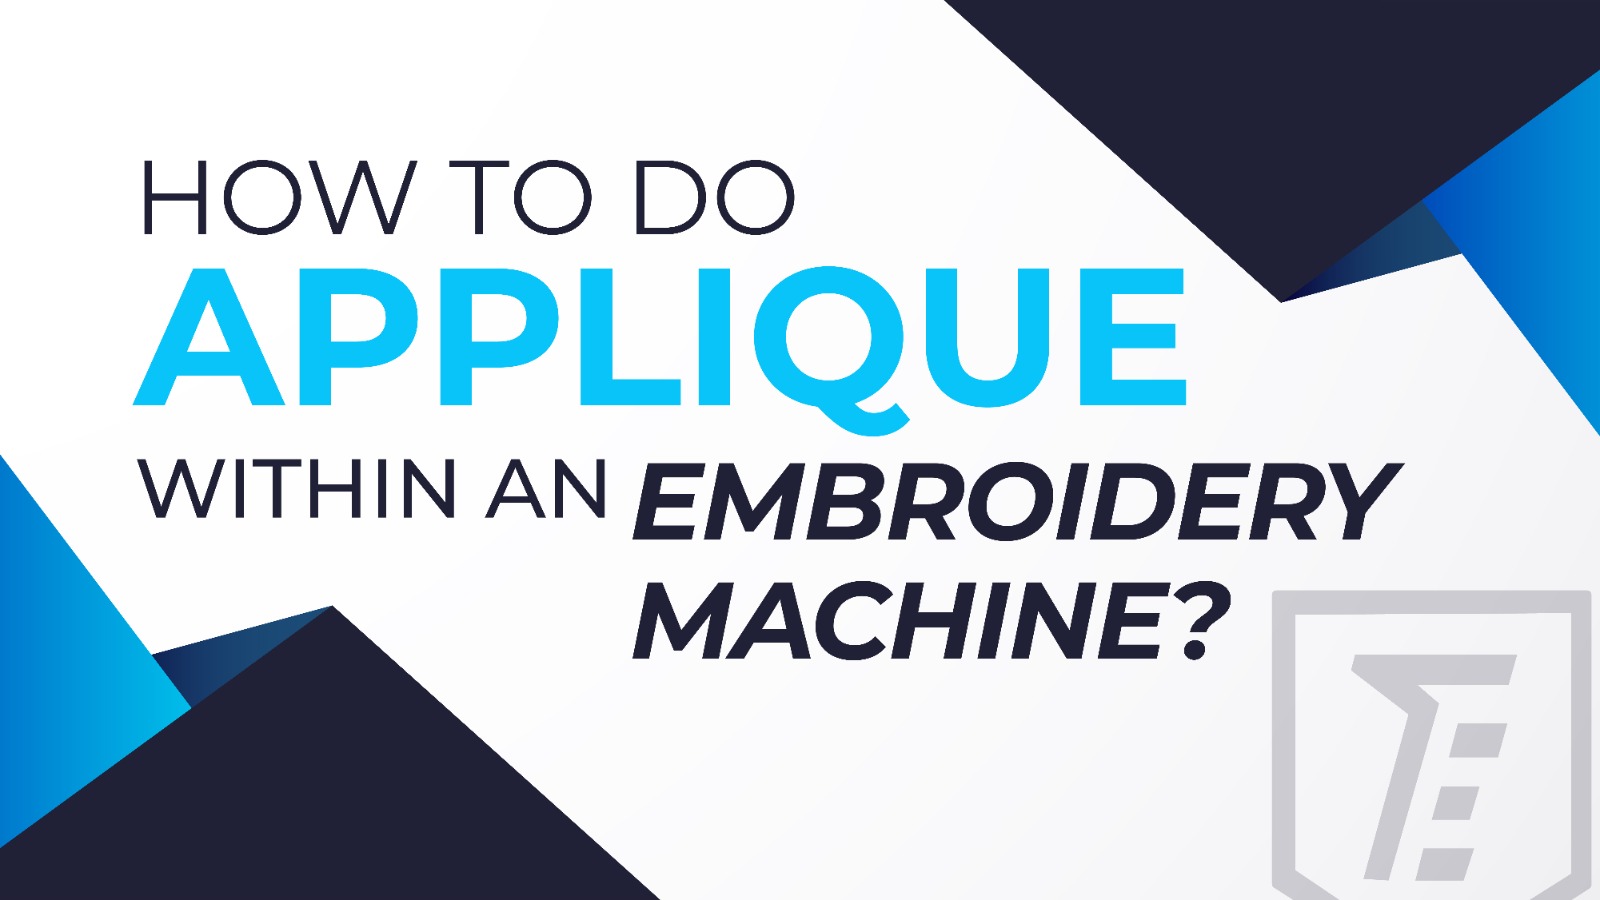 How to do applique with an embroidery machine